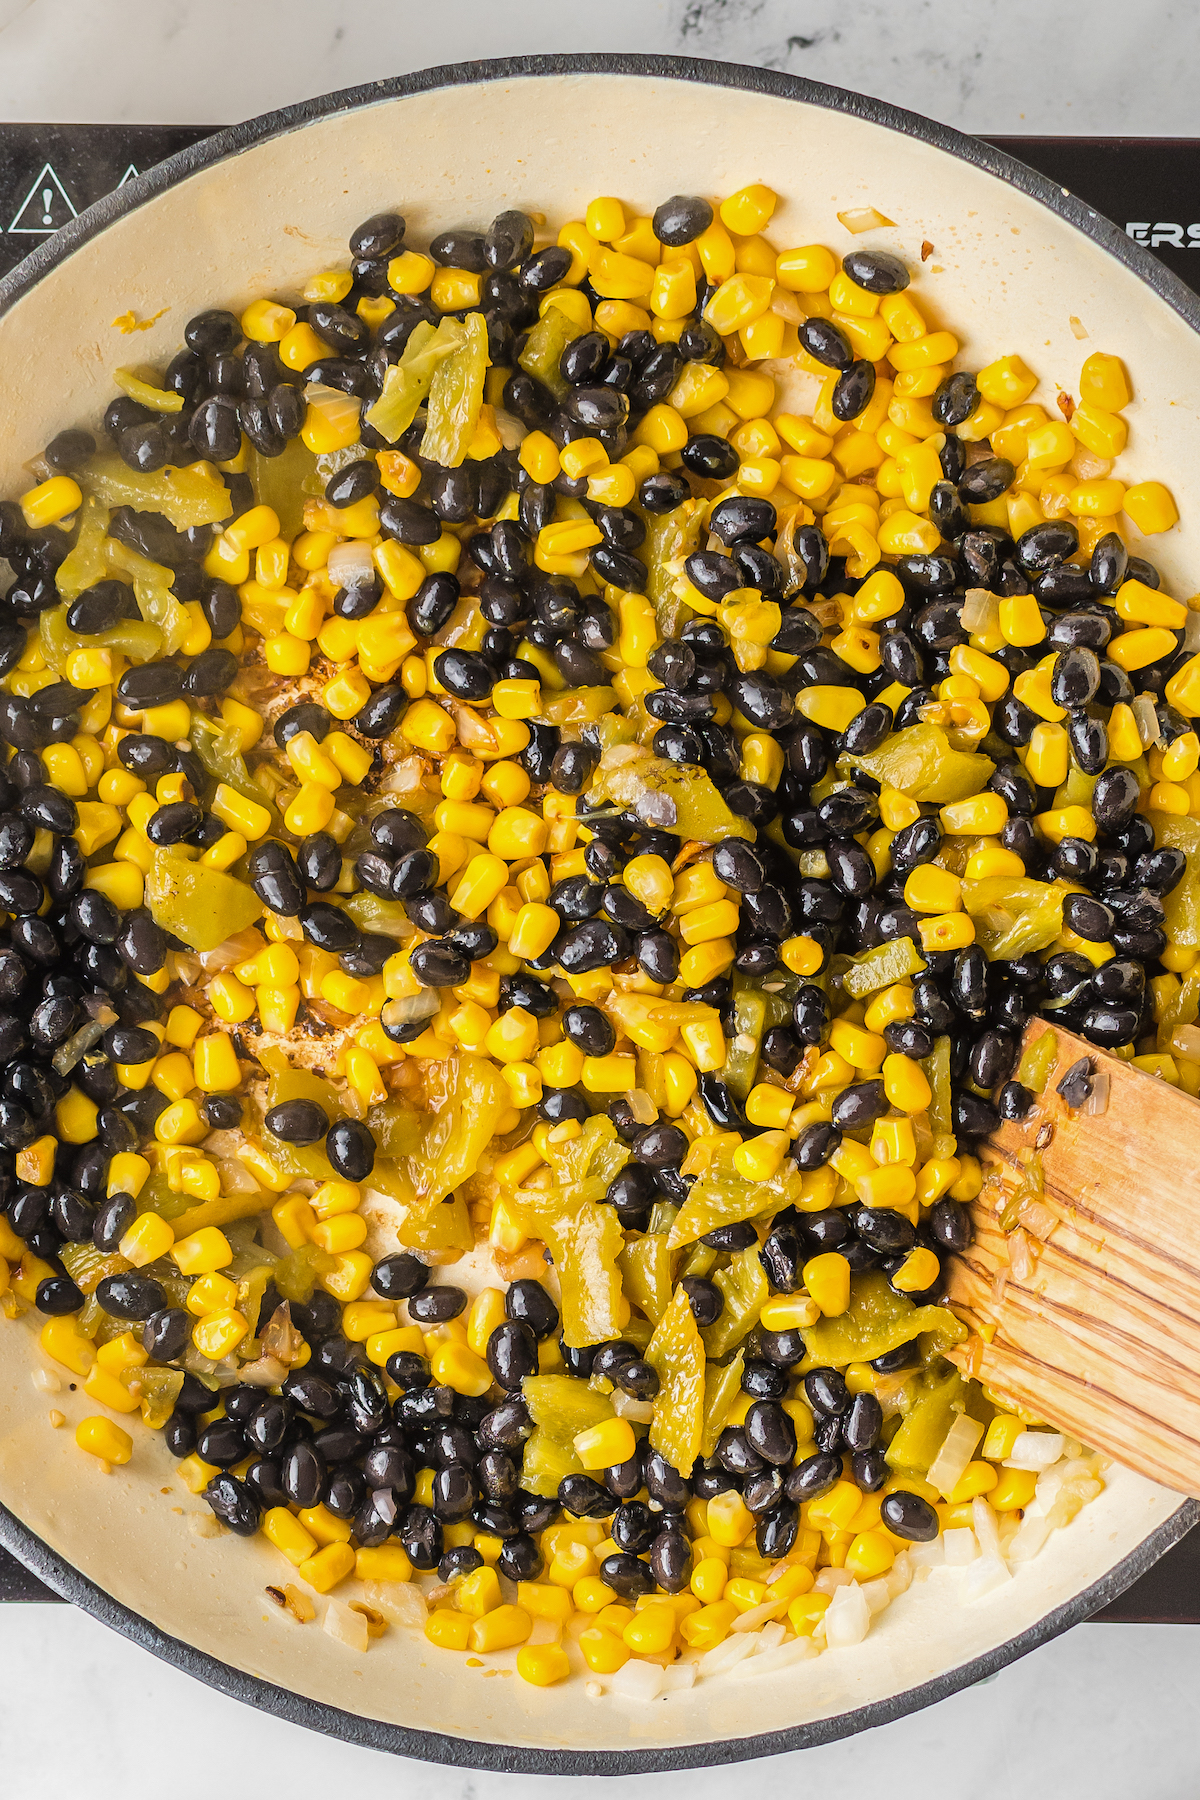 Corn, black beans, and other ingredients sauteing in a large skillet.